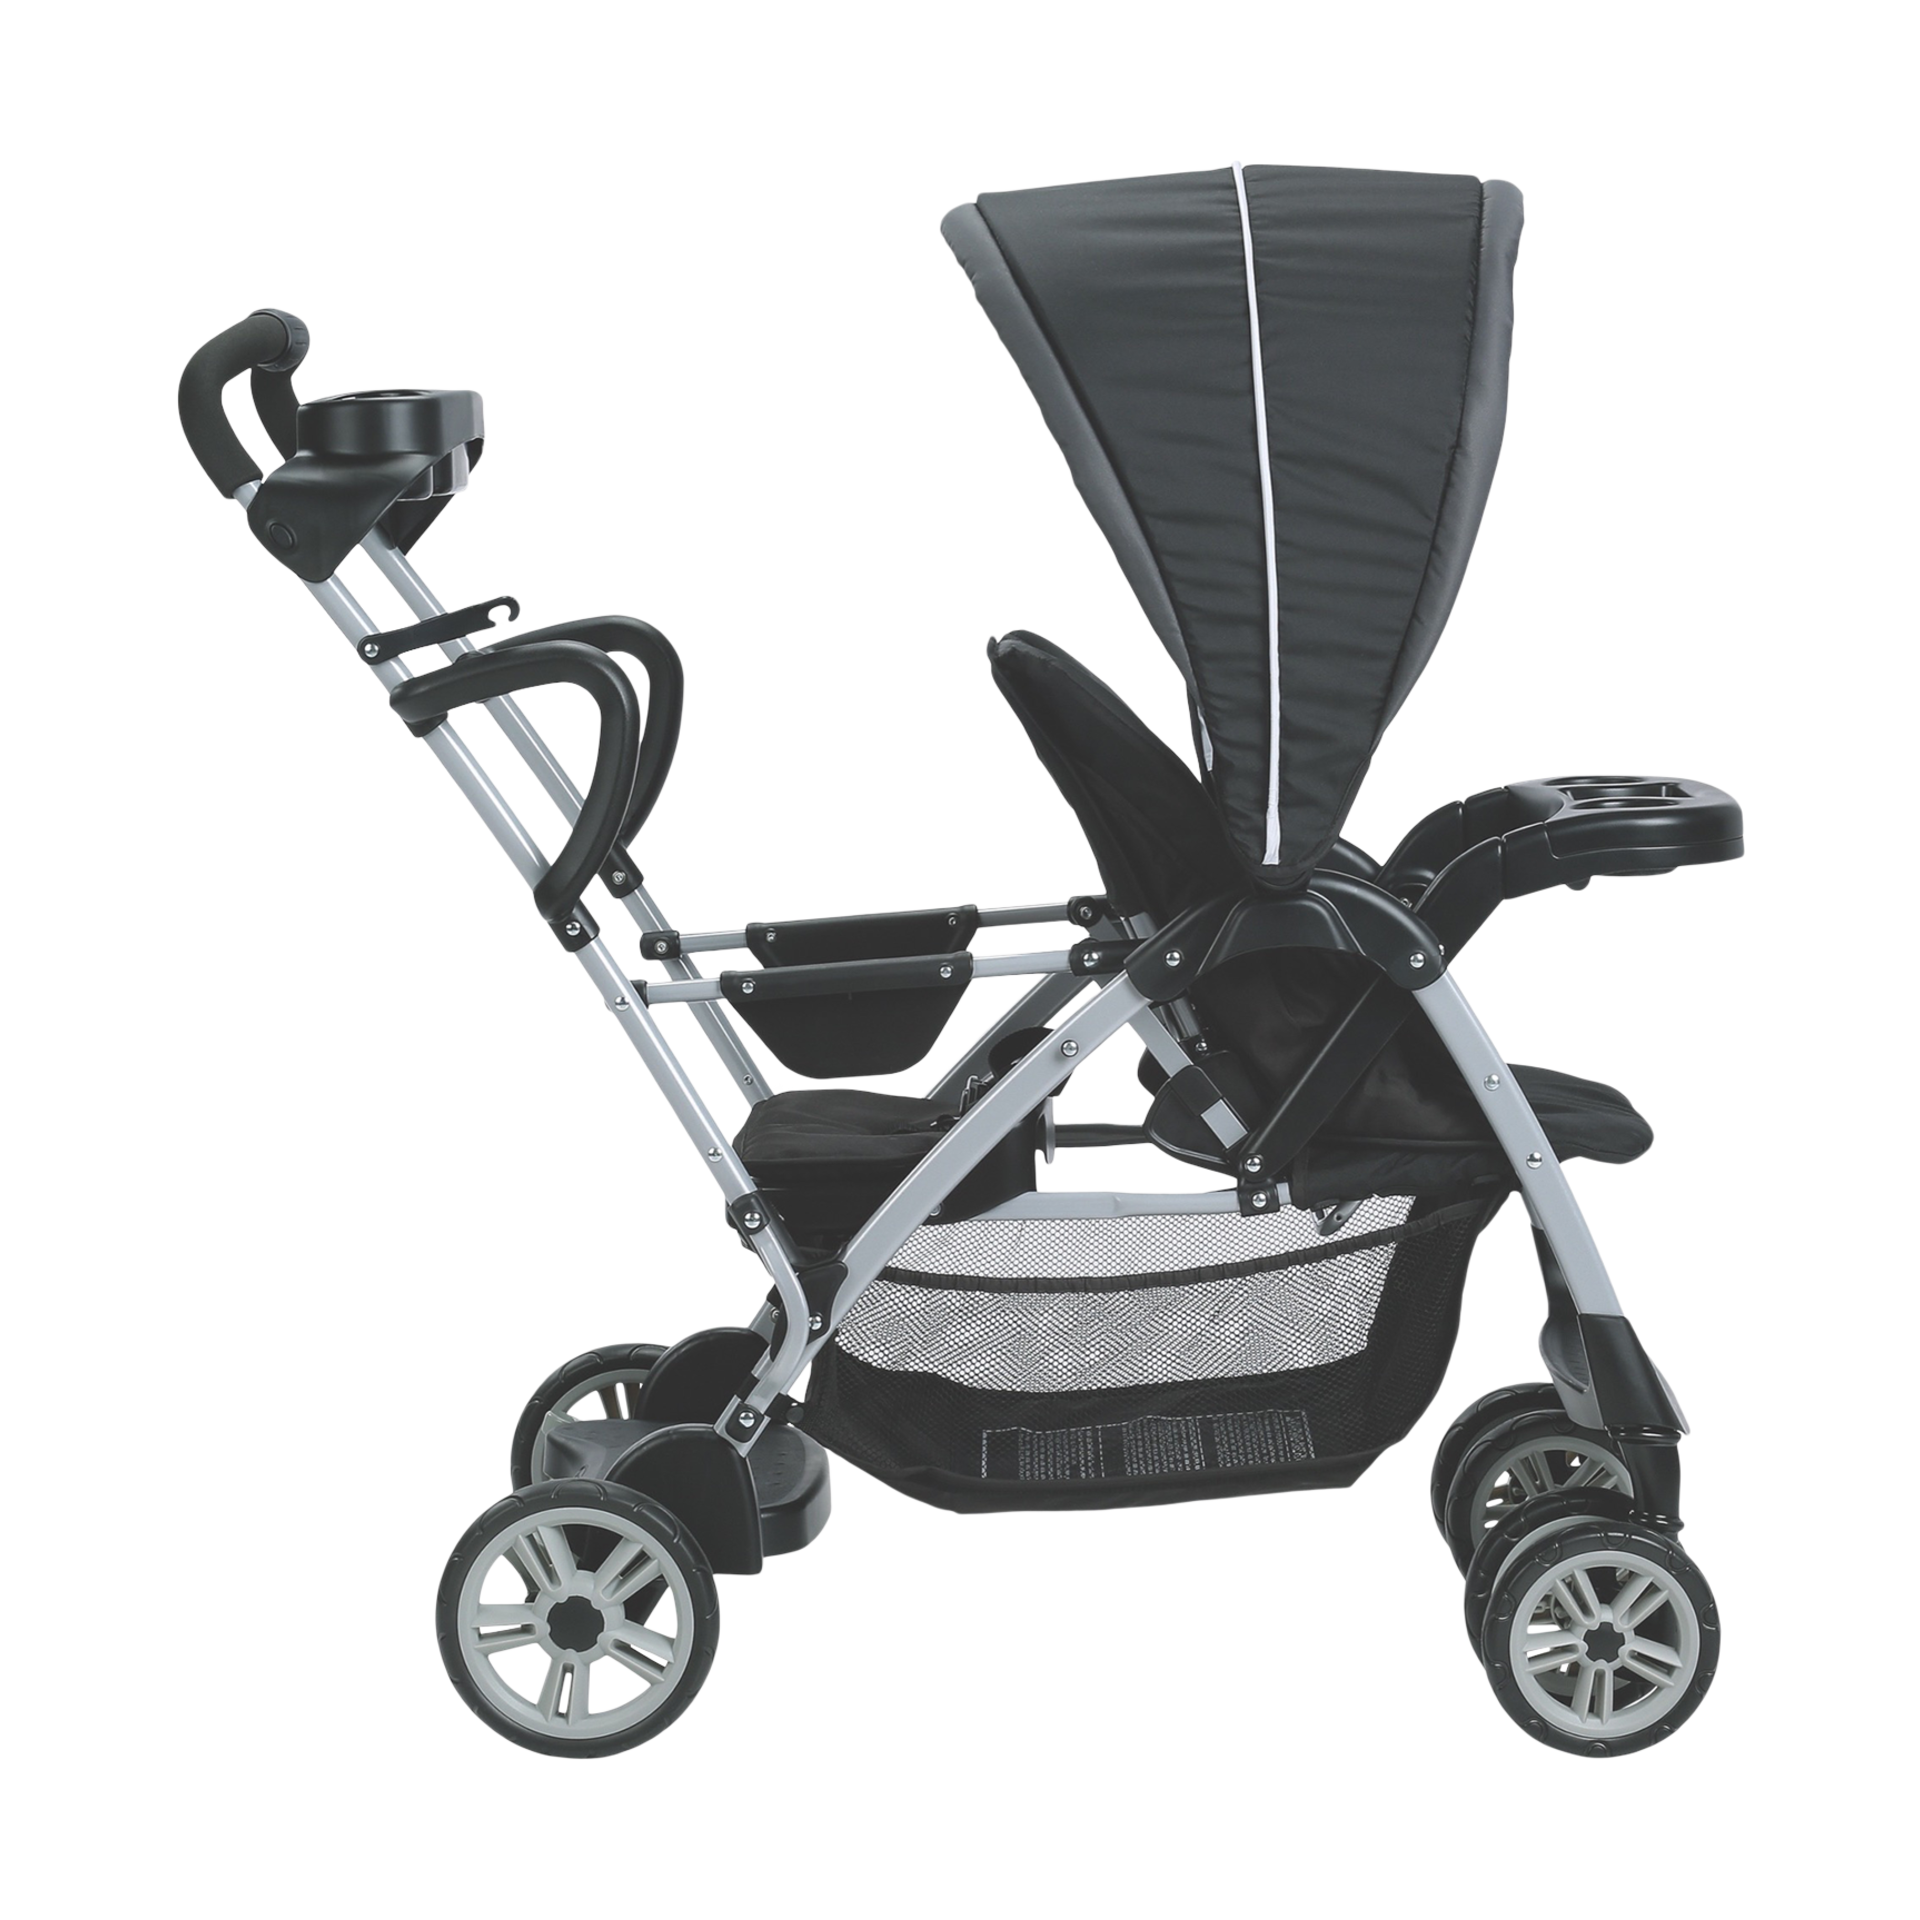 stand and go stroller